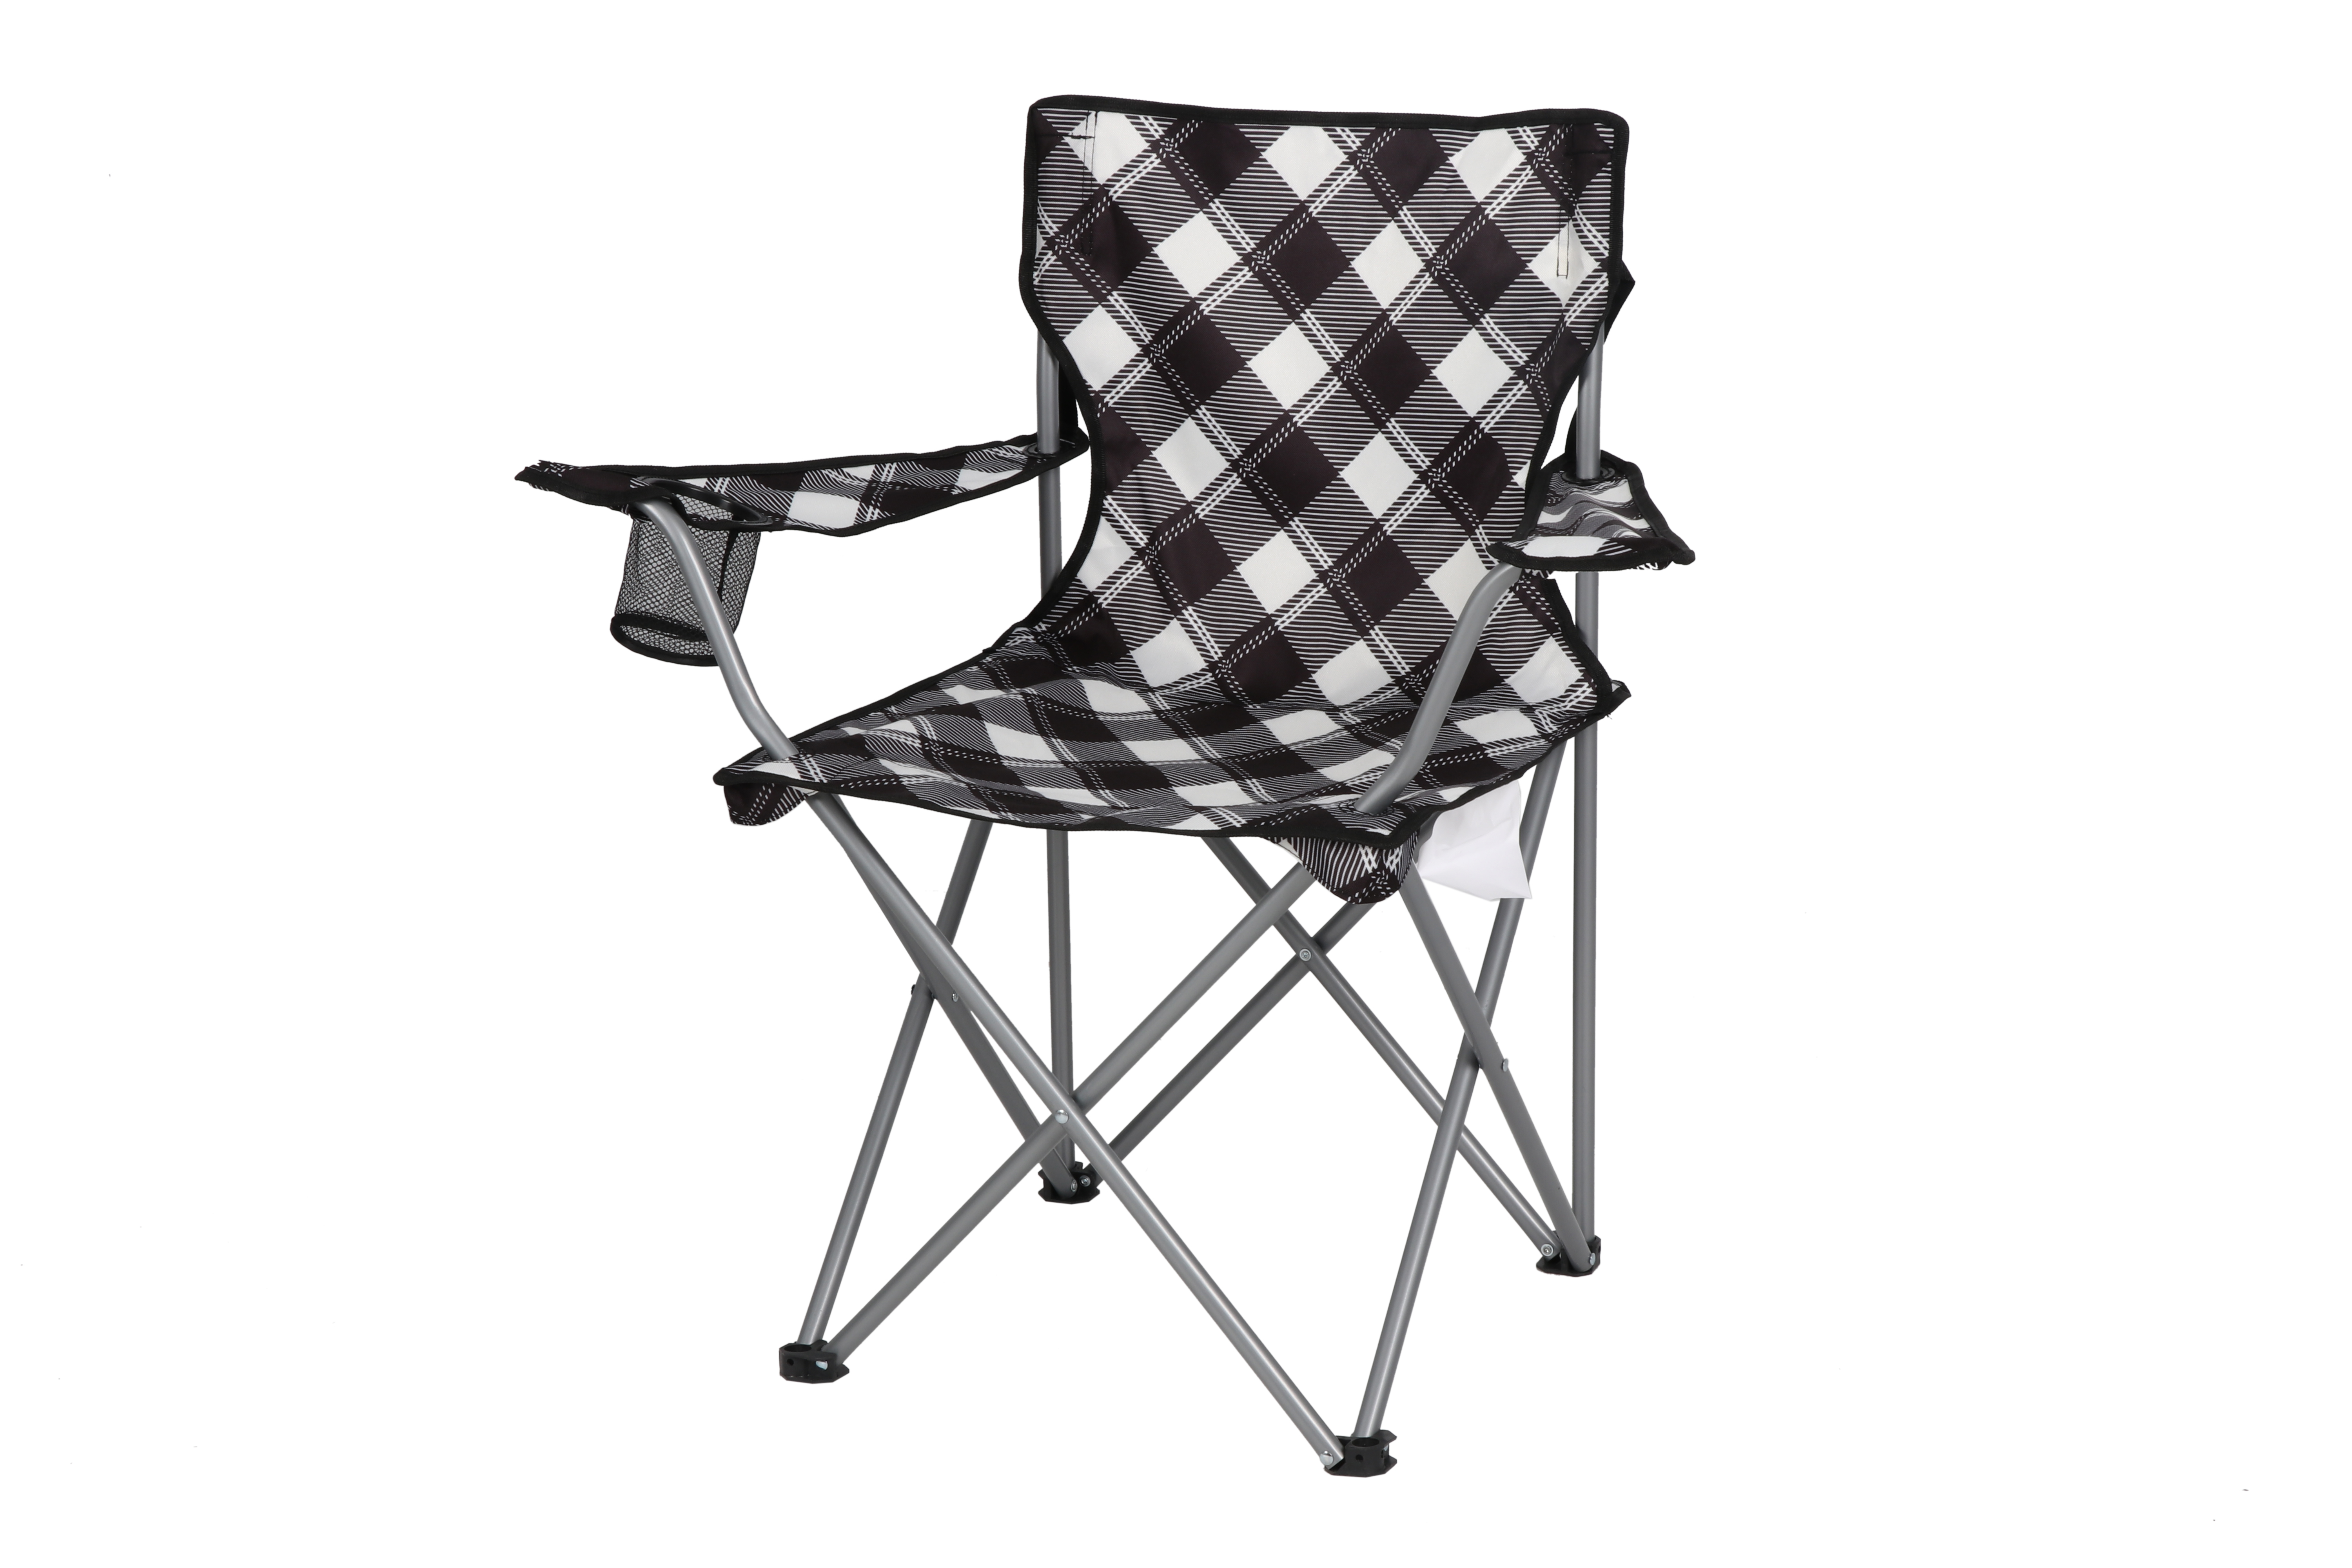 Ozark Trail Blanket and Two Chair Combo, Adult, Black White - image 4 of 14